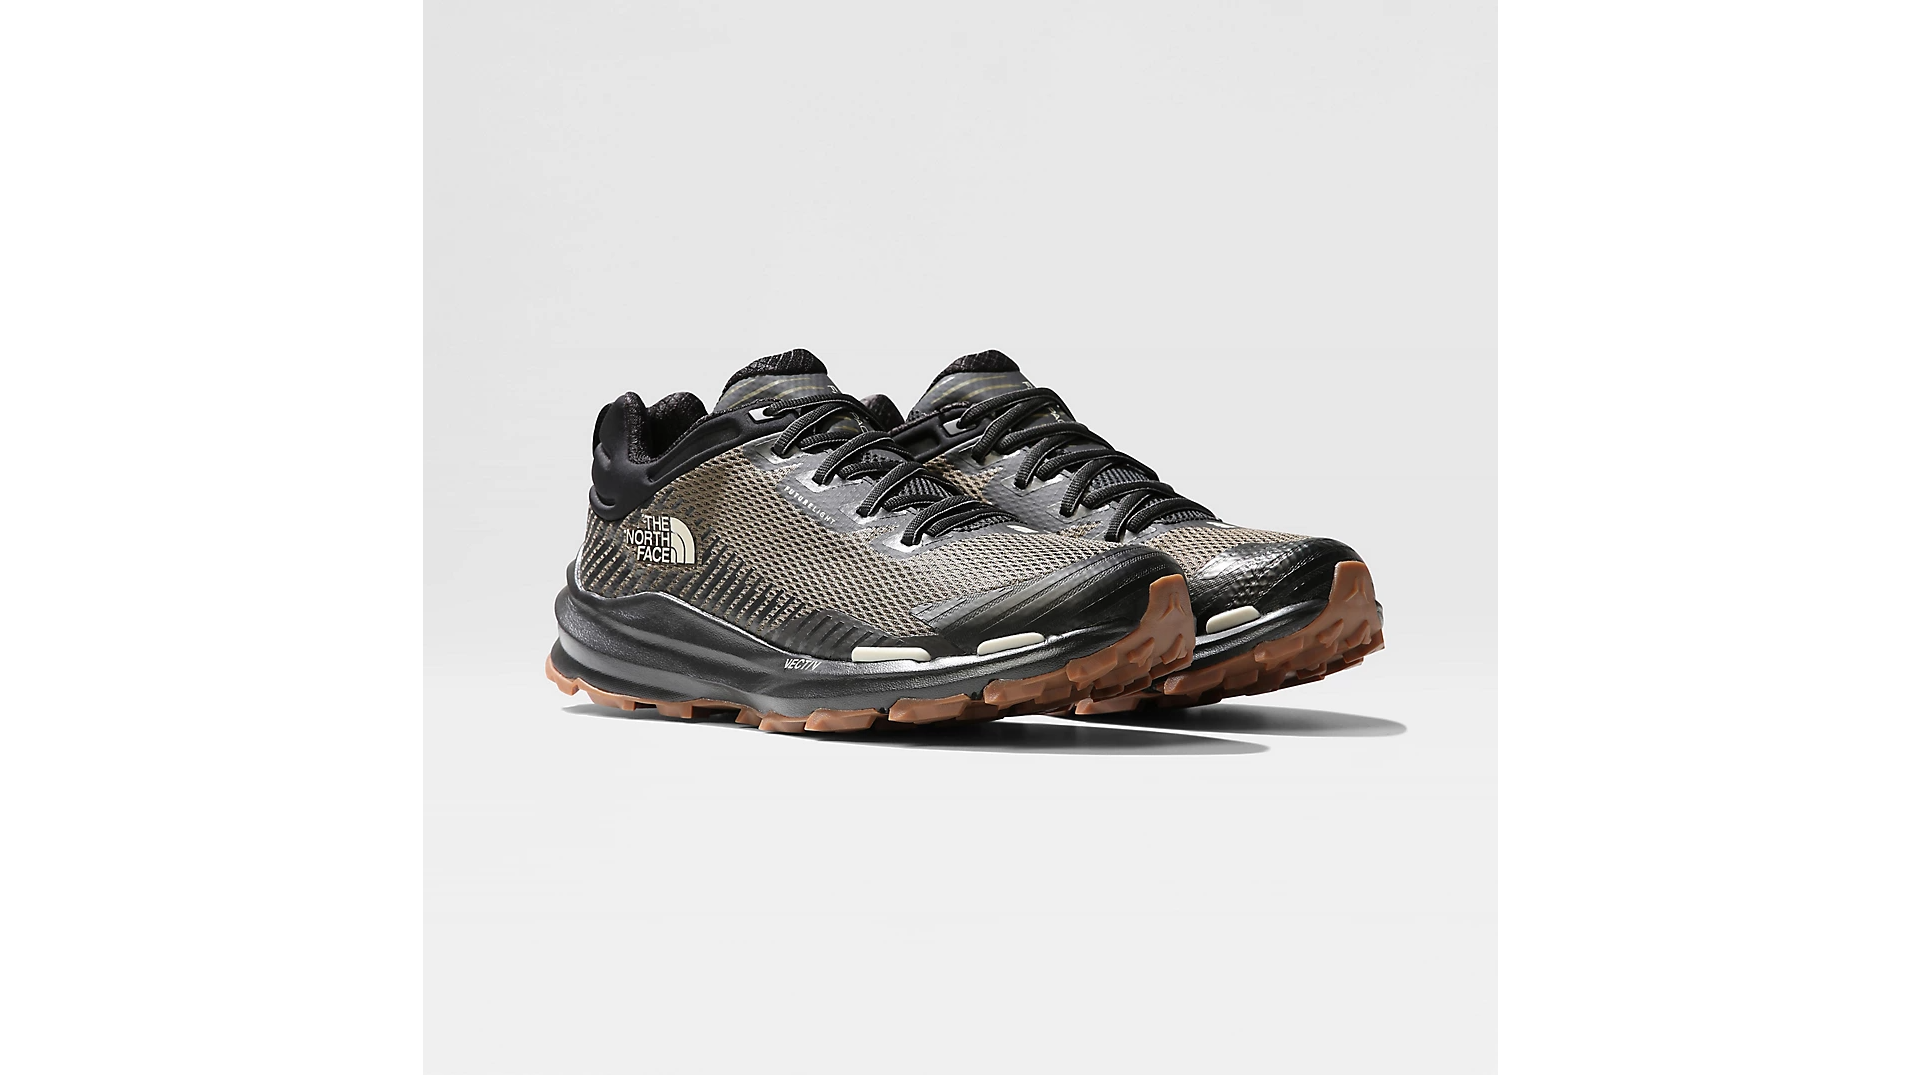 The North Face Mens Vectiv Fastpack Futurelight Shoe